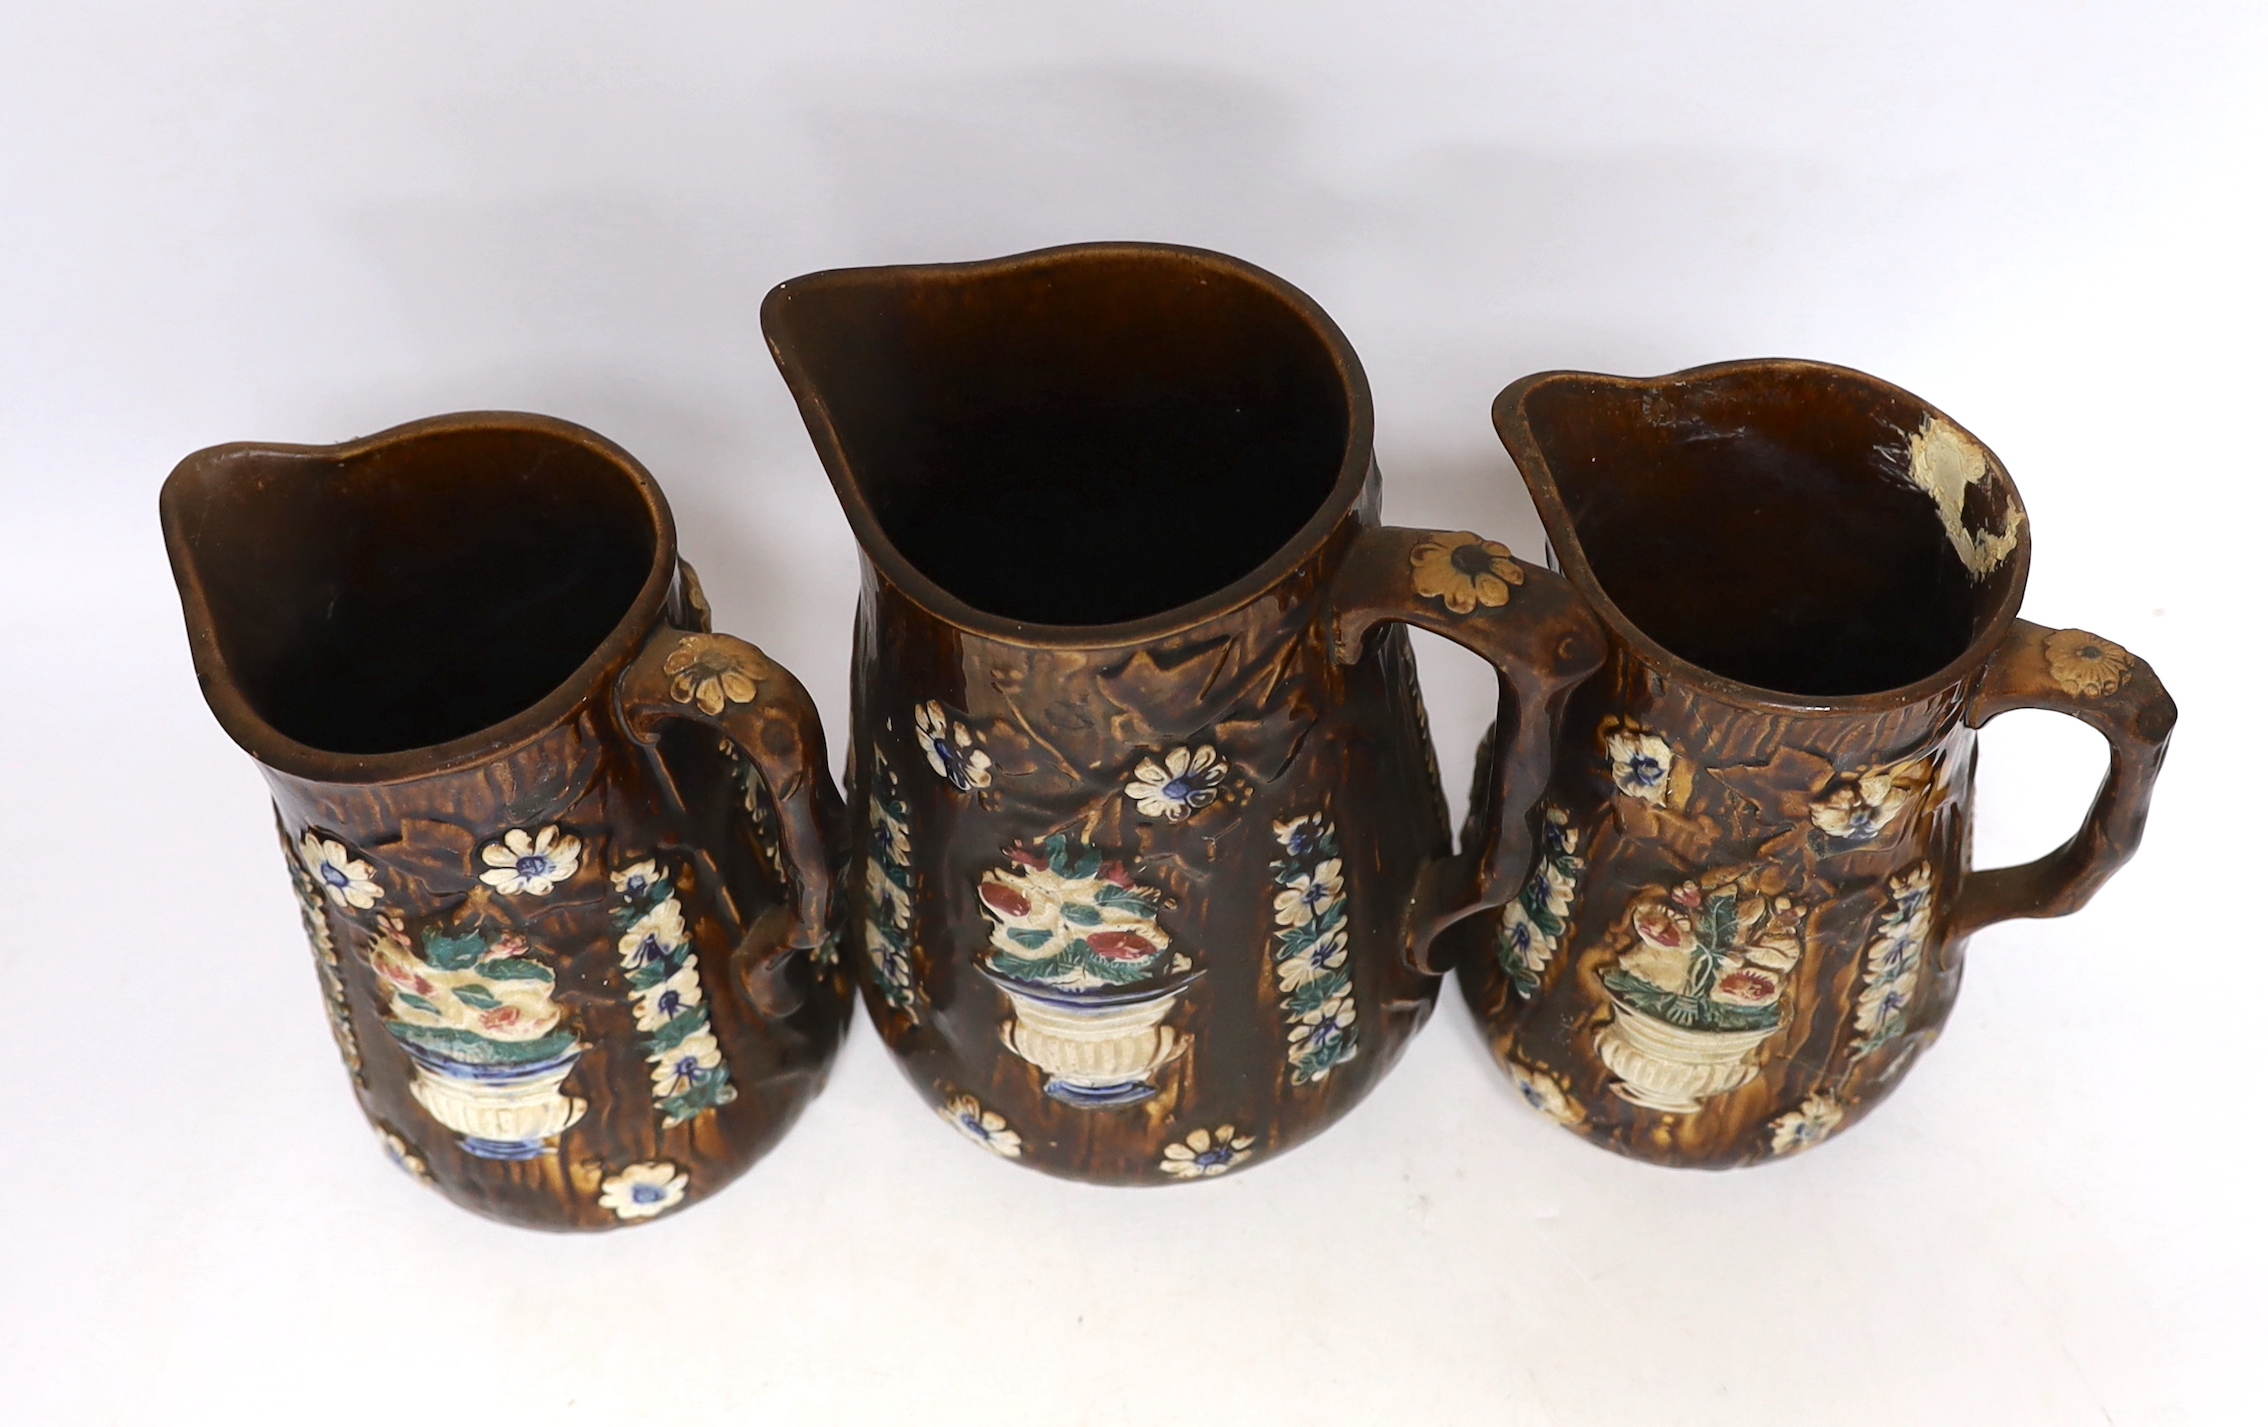 Three Measham barge ware glazed pottery jugs, decorated in relief, largest 22cm high